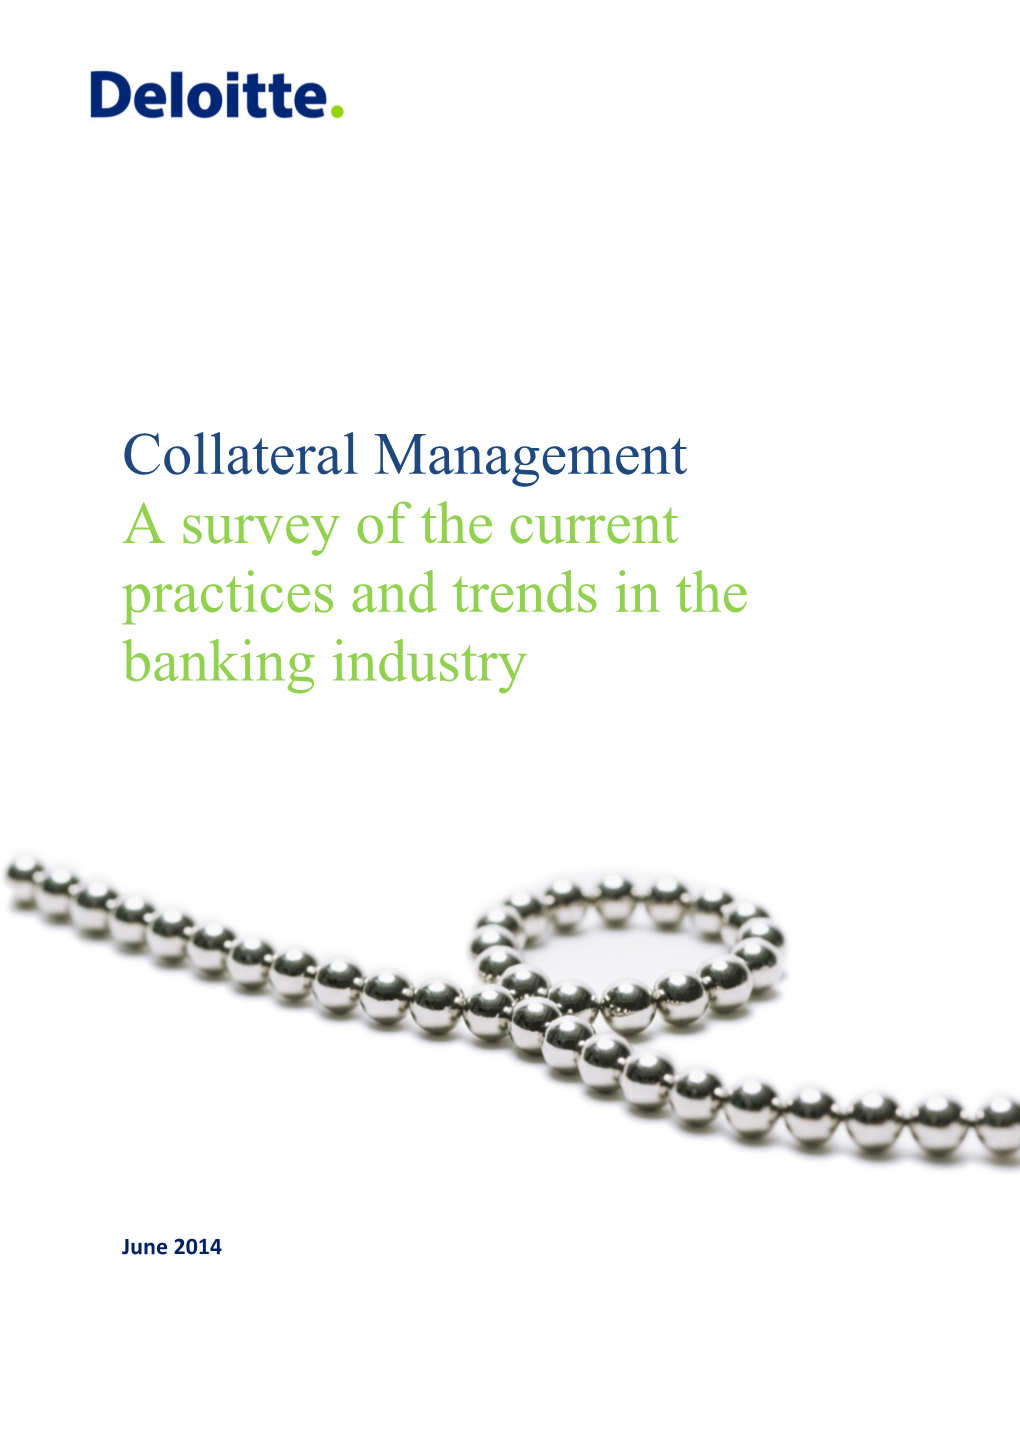 Collateral Management a Survey of the Current Practices and Trends in the Banking Industry